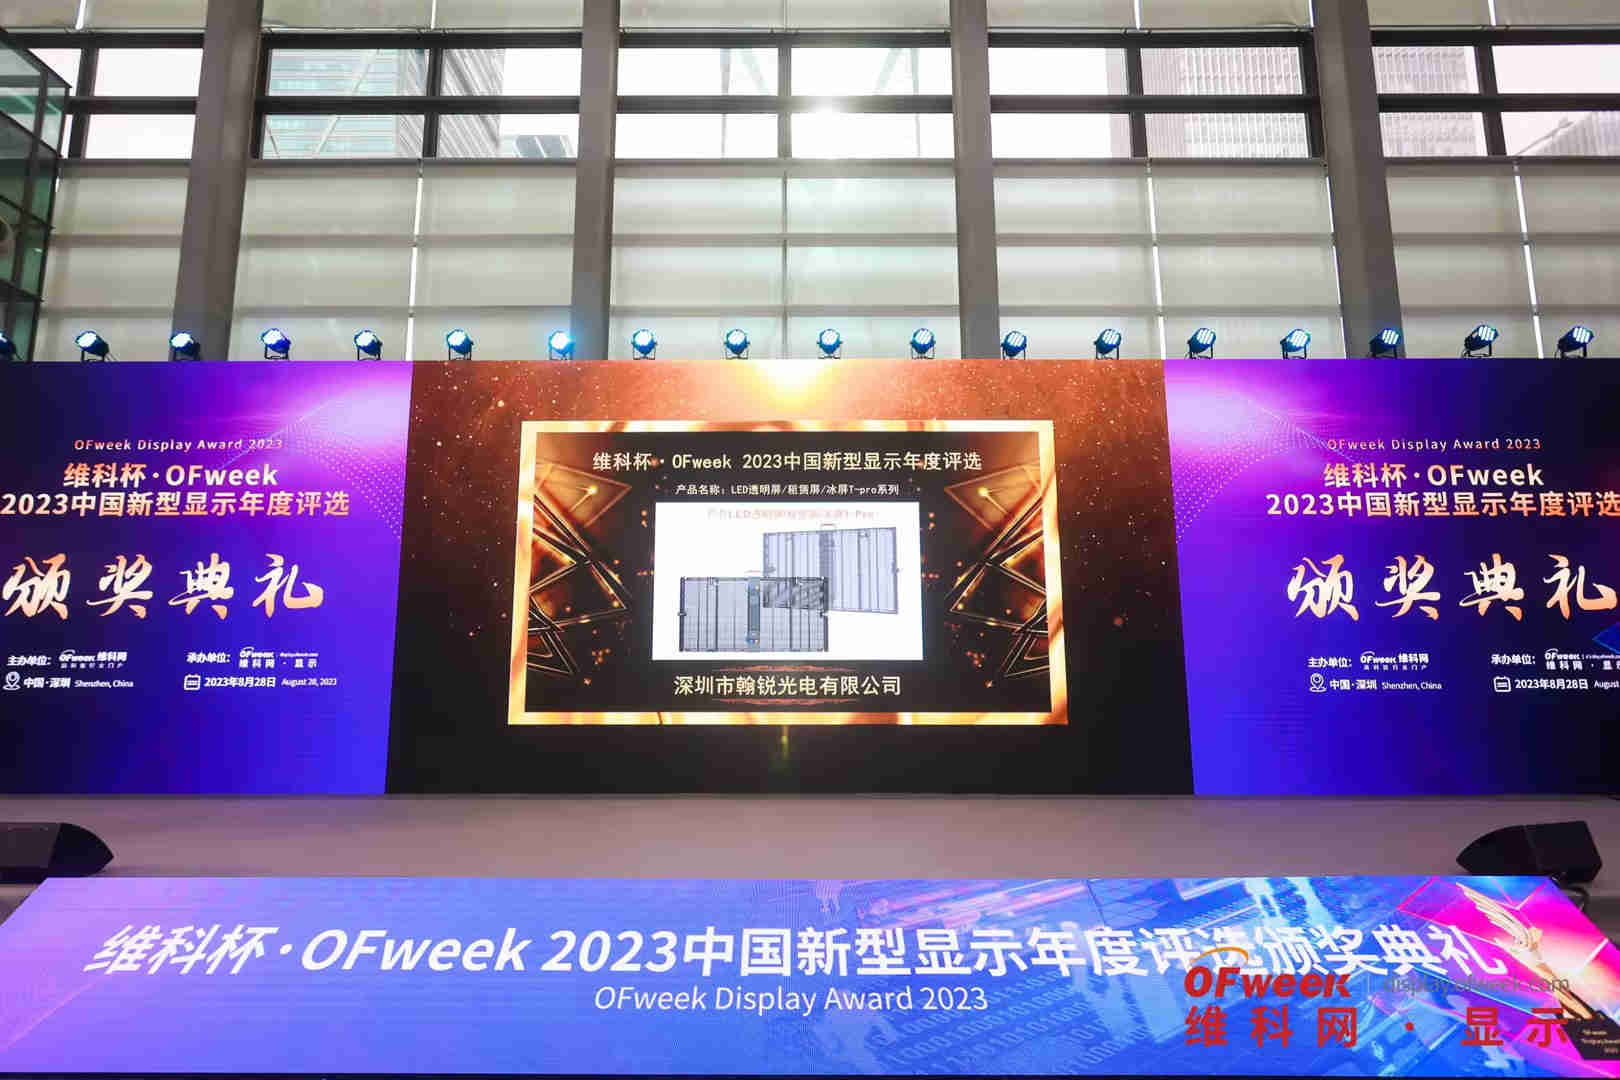 LED transparent screen P3.91×7.81: Winner of the 2023 Creative Display Application Solution Award